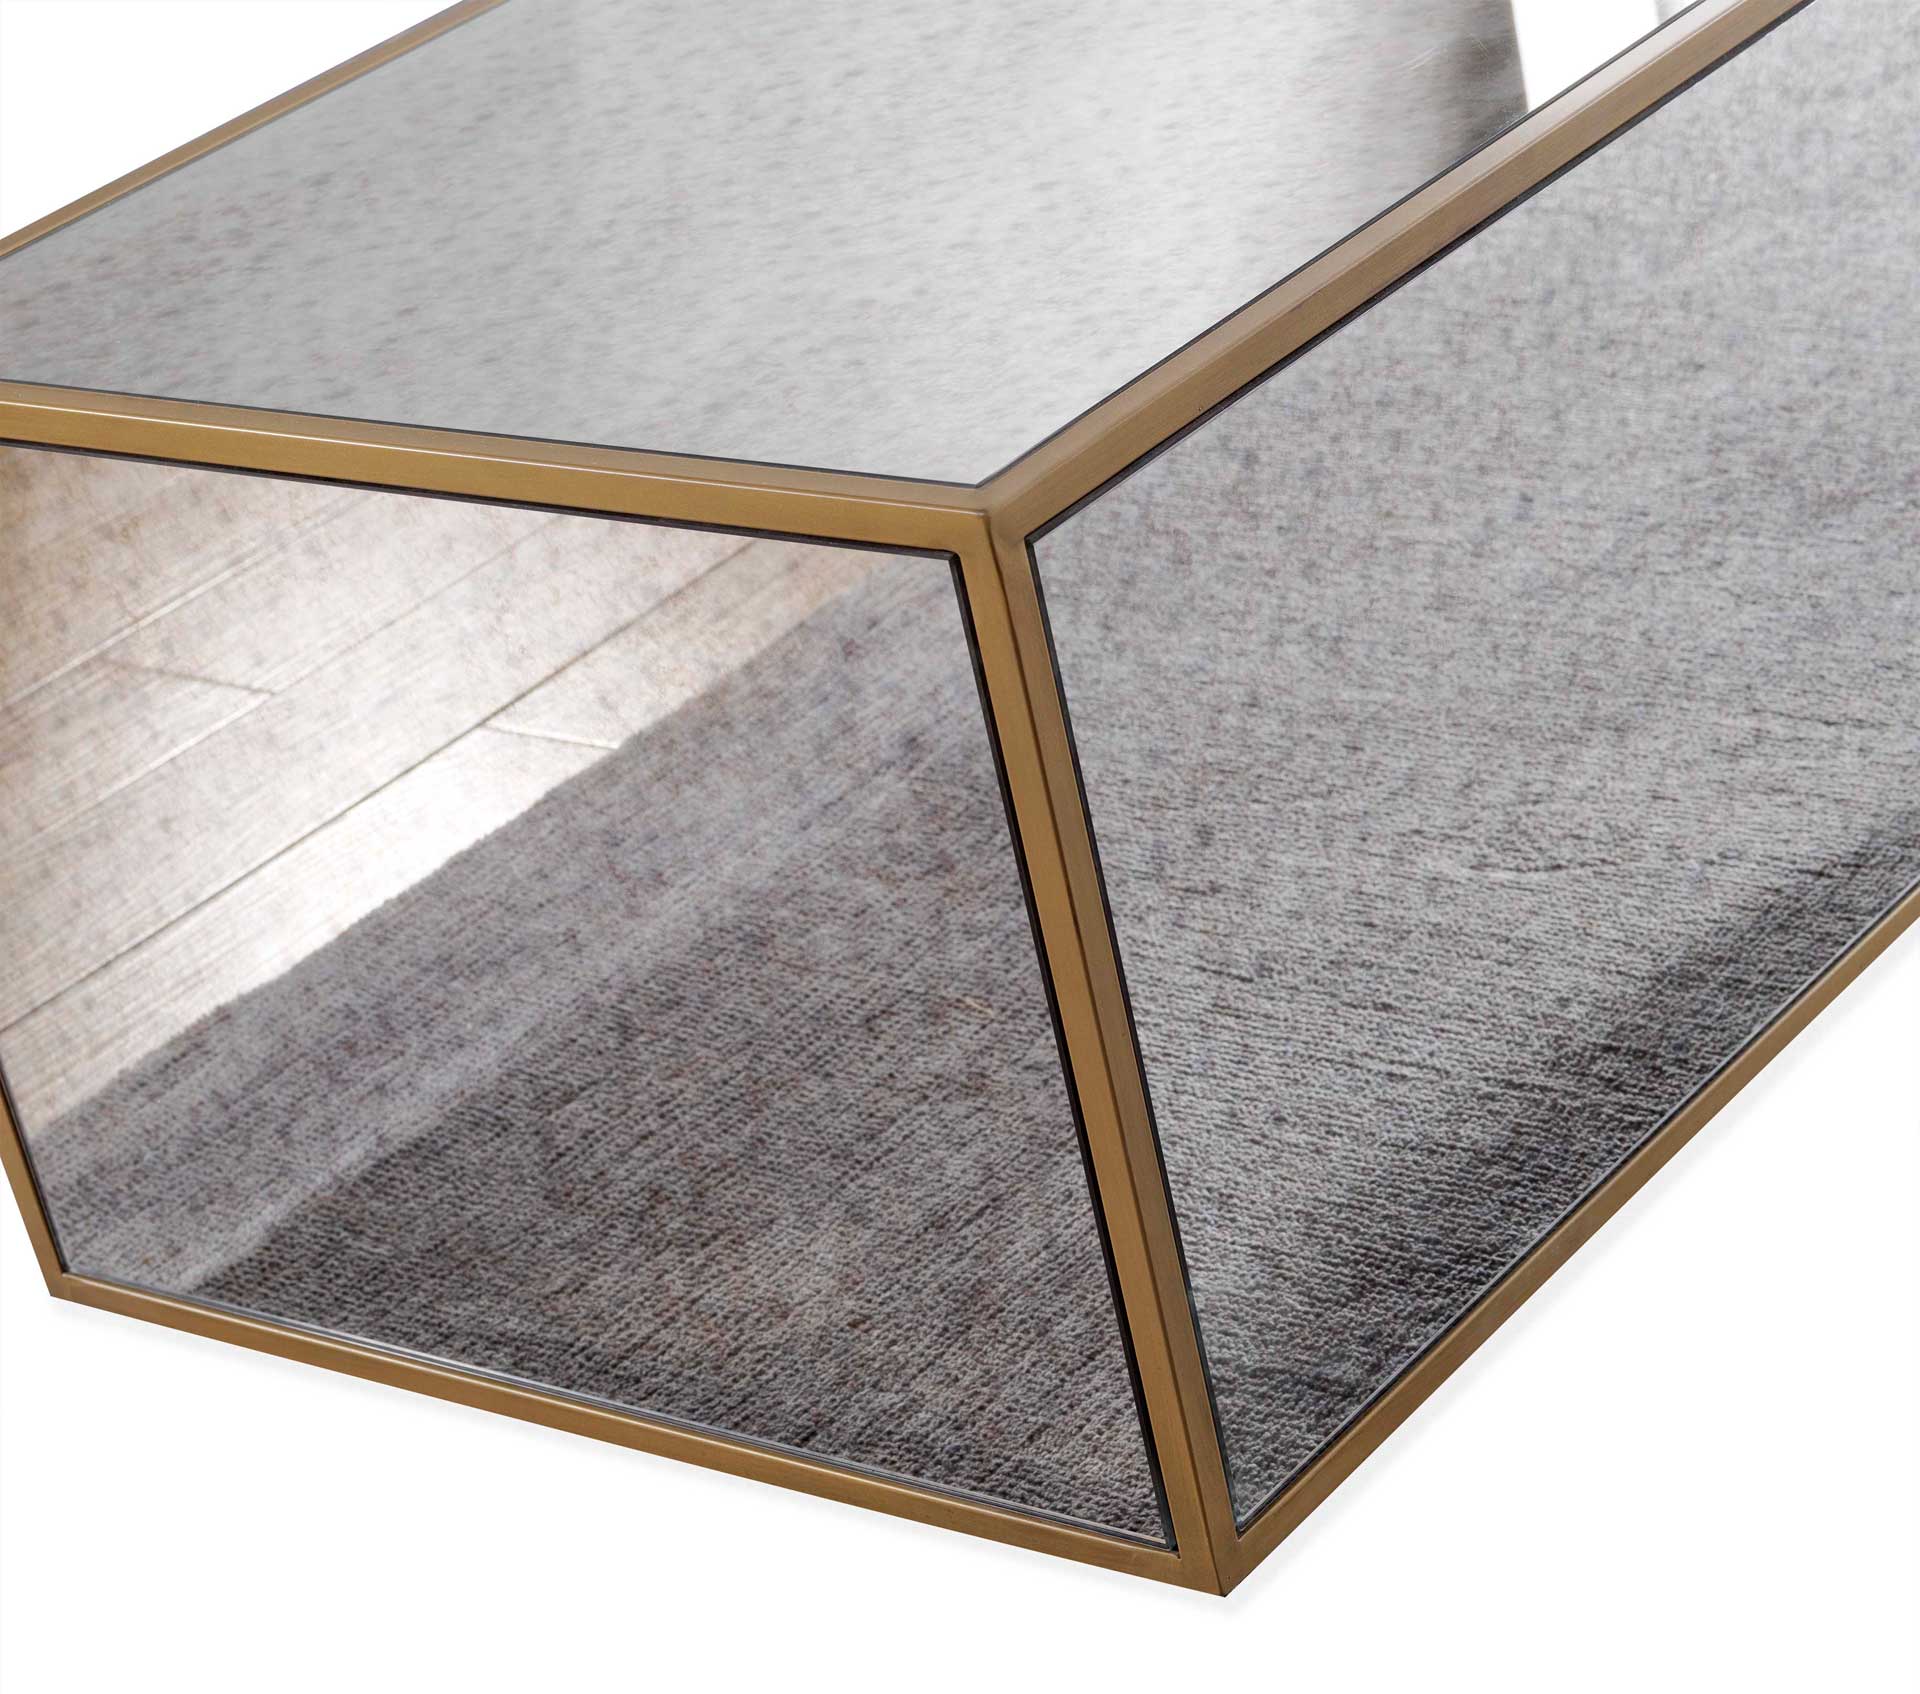 Lacey Mirrored Coffee Table Antique Mirror